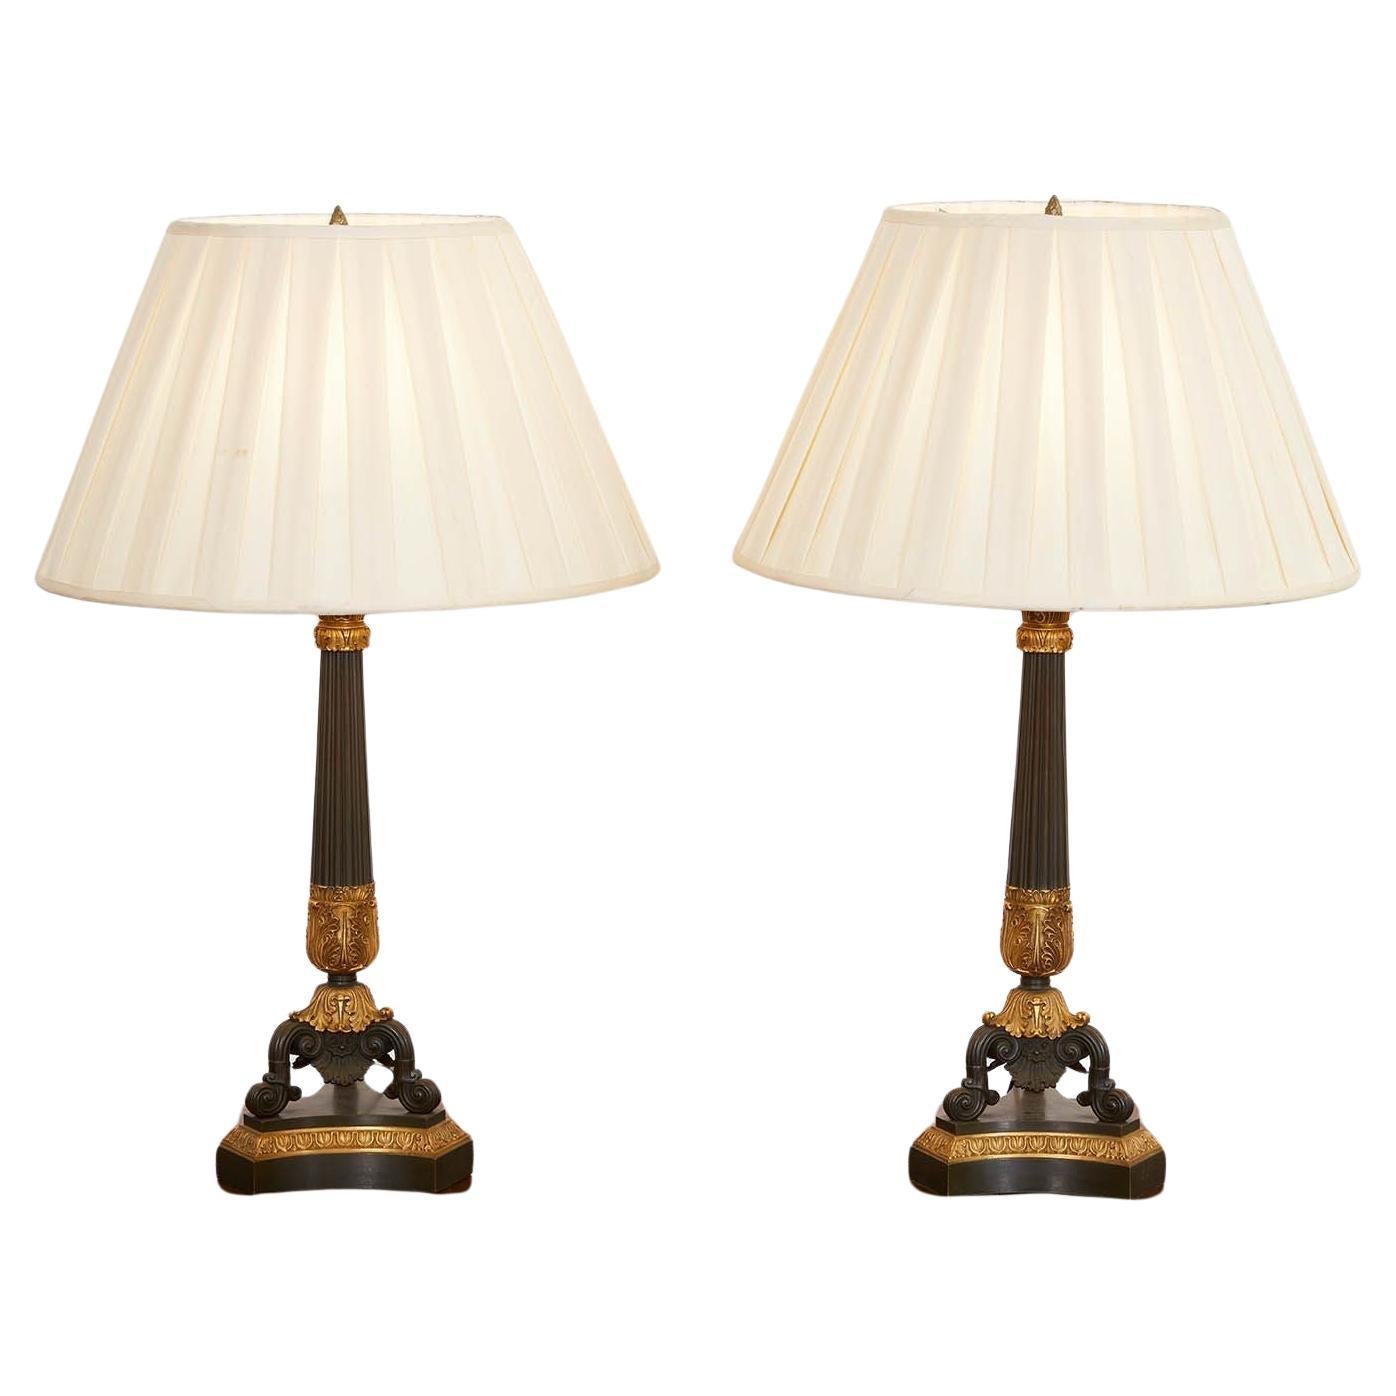 Pair of Neoclassical Bronze and Ormolu Tabletop Lamps For Sale